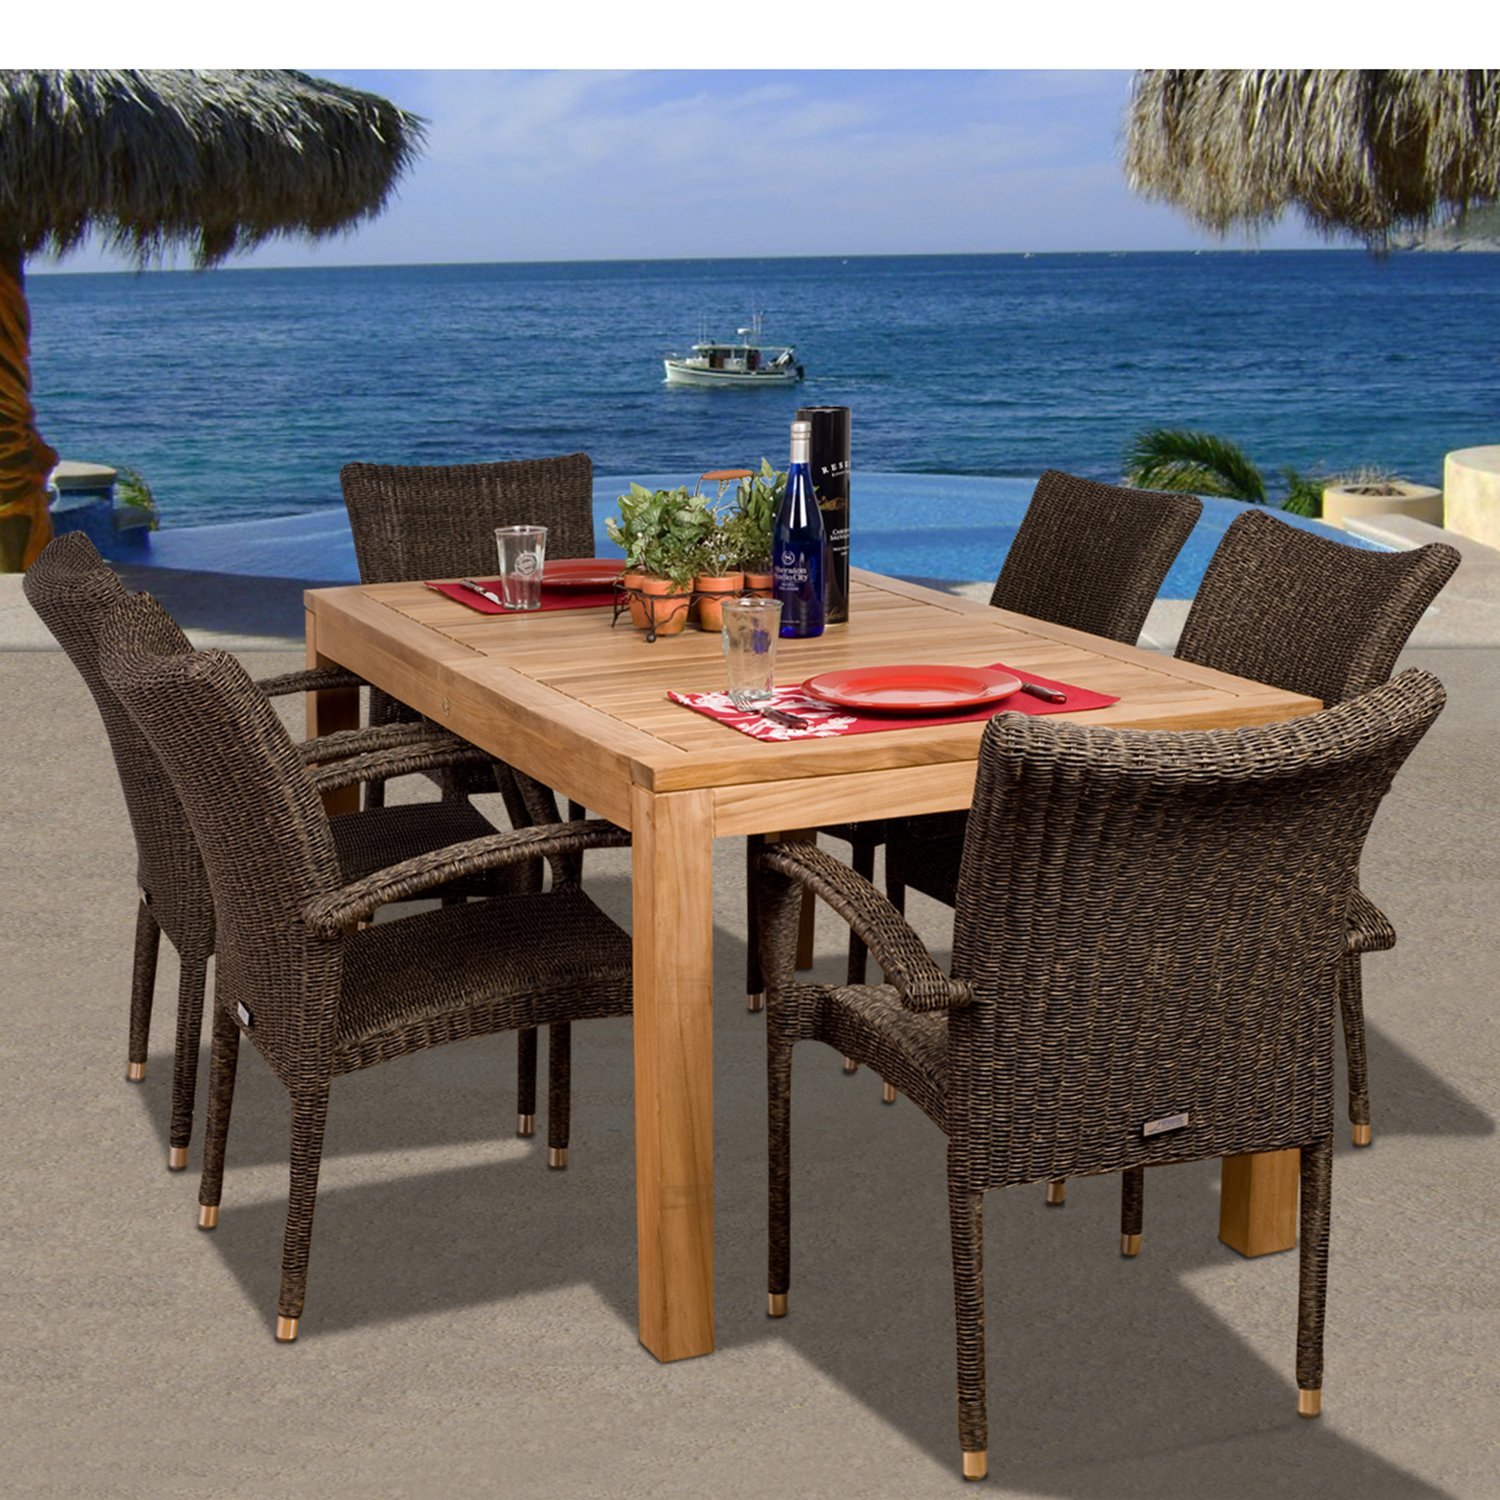 Stylish Design Teak Dining Table: Make A Statement In Your Dining Room